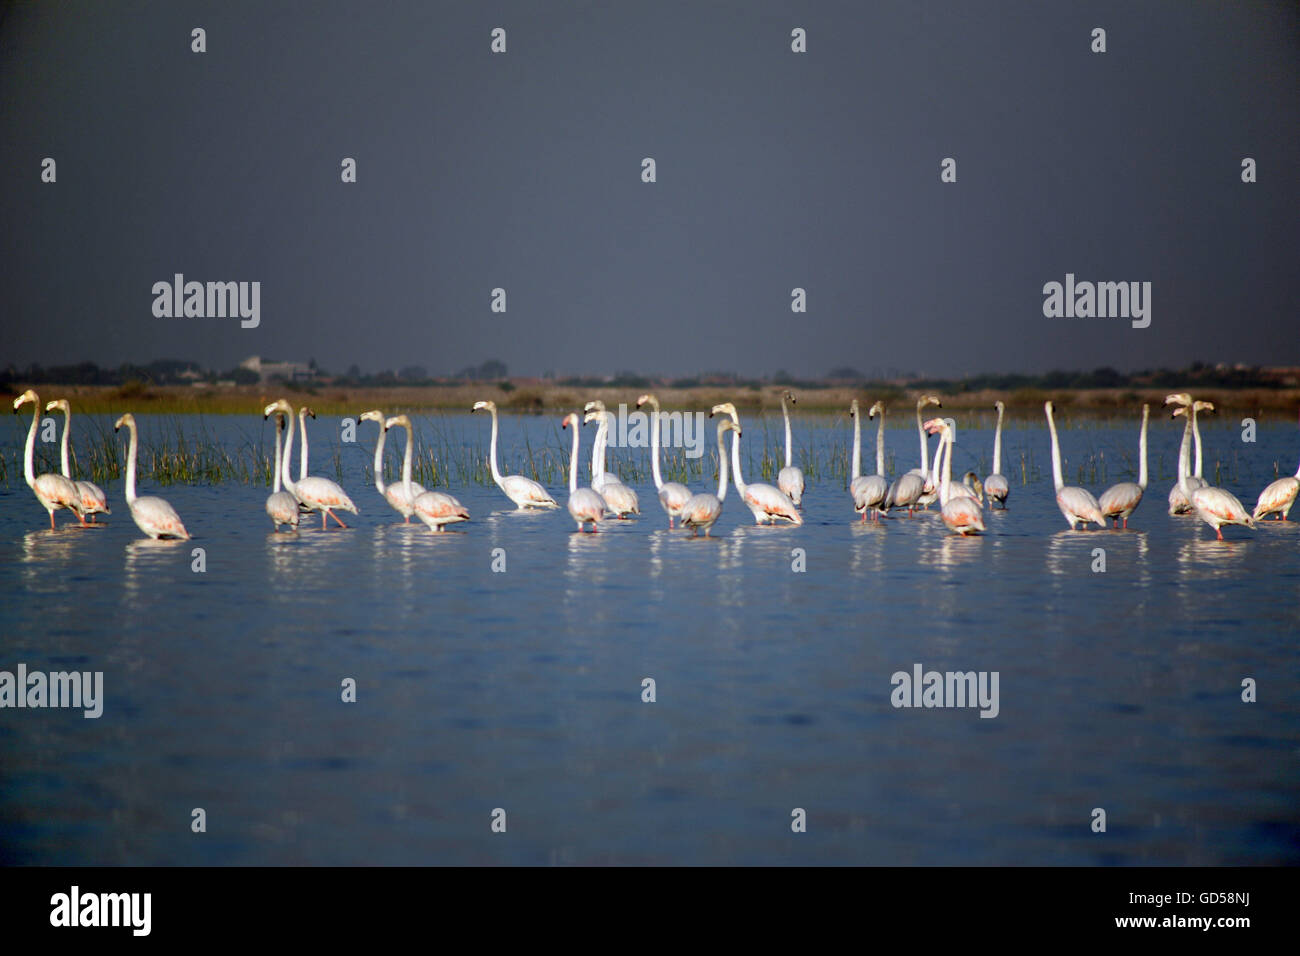 A stand of Flamingos Stock Photo